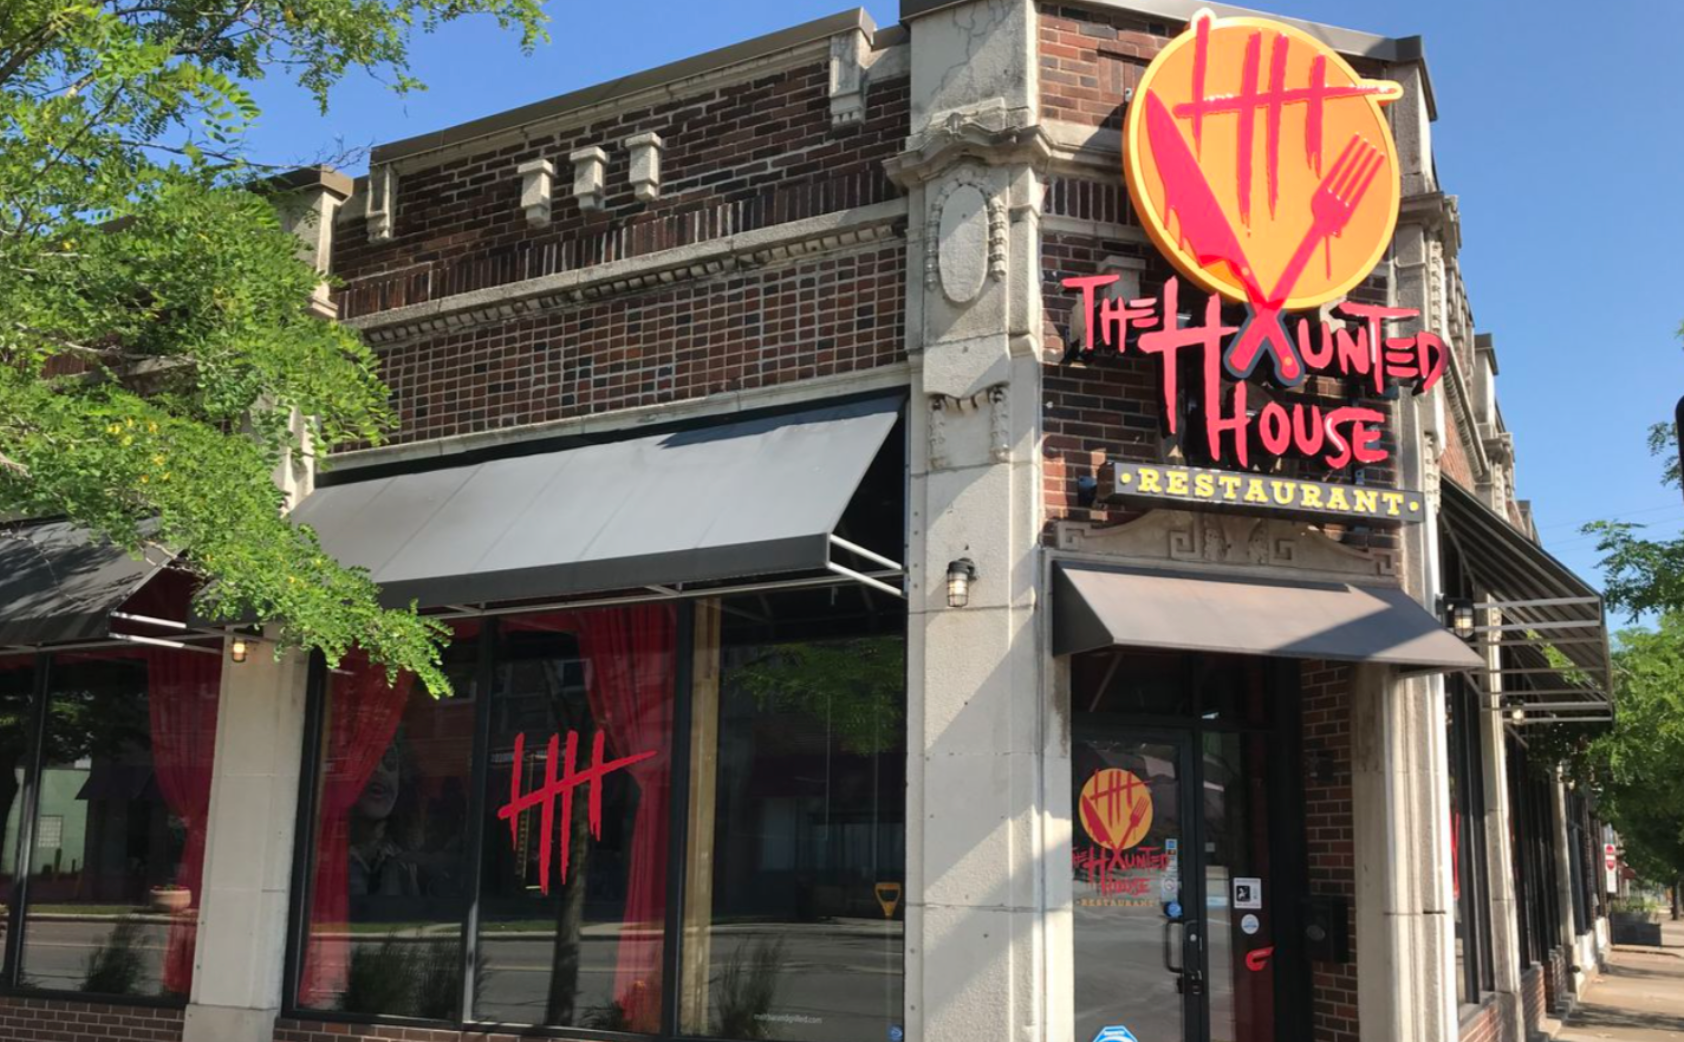 A Horror Movie-Themed Restaurant With Scary Good Food, The Haunted House Restaurant In Cleveland, Ohio, Is a Must-Visit